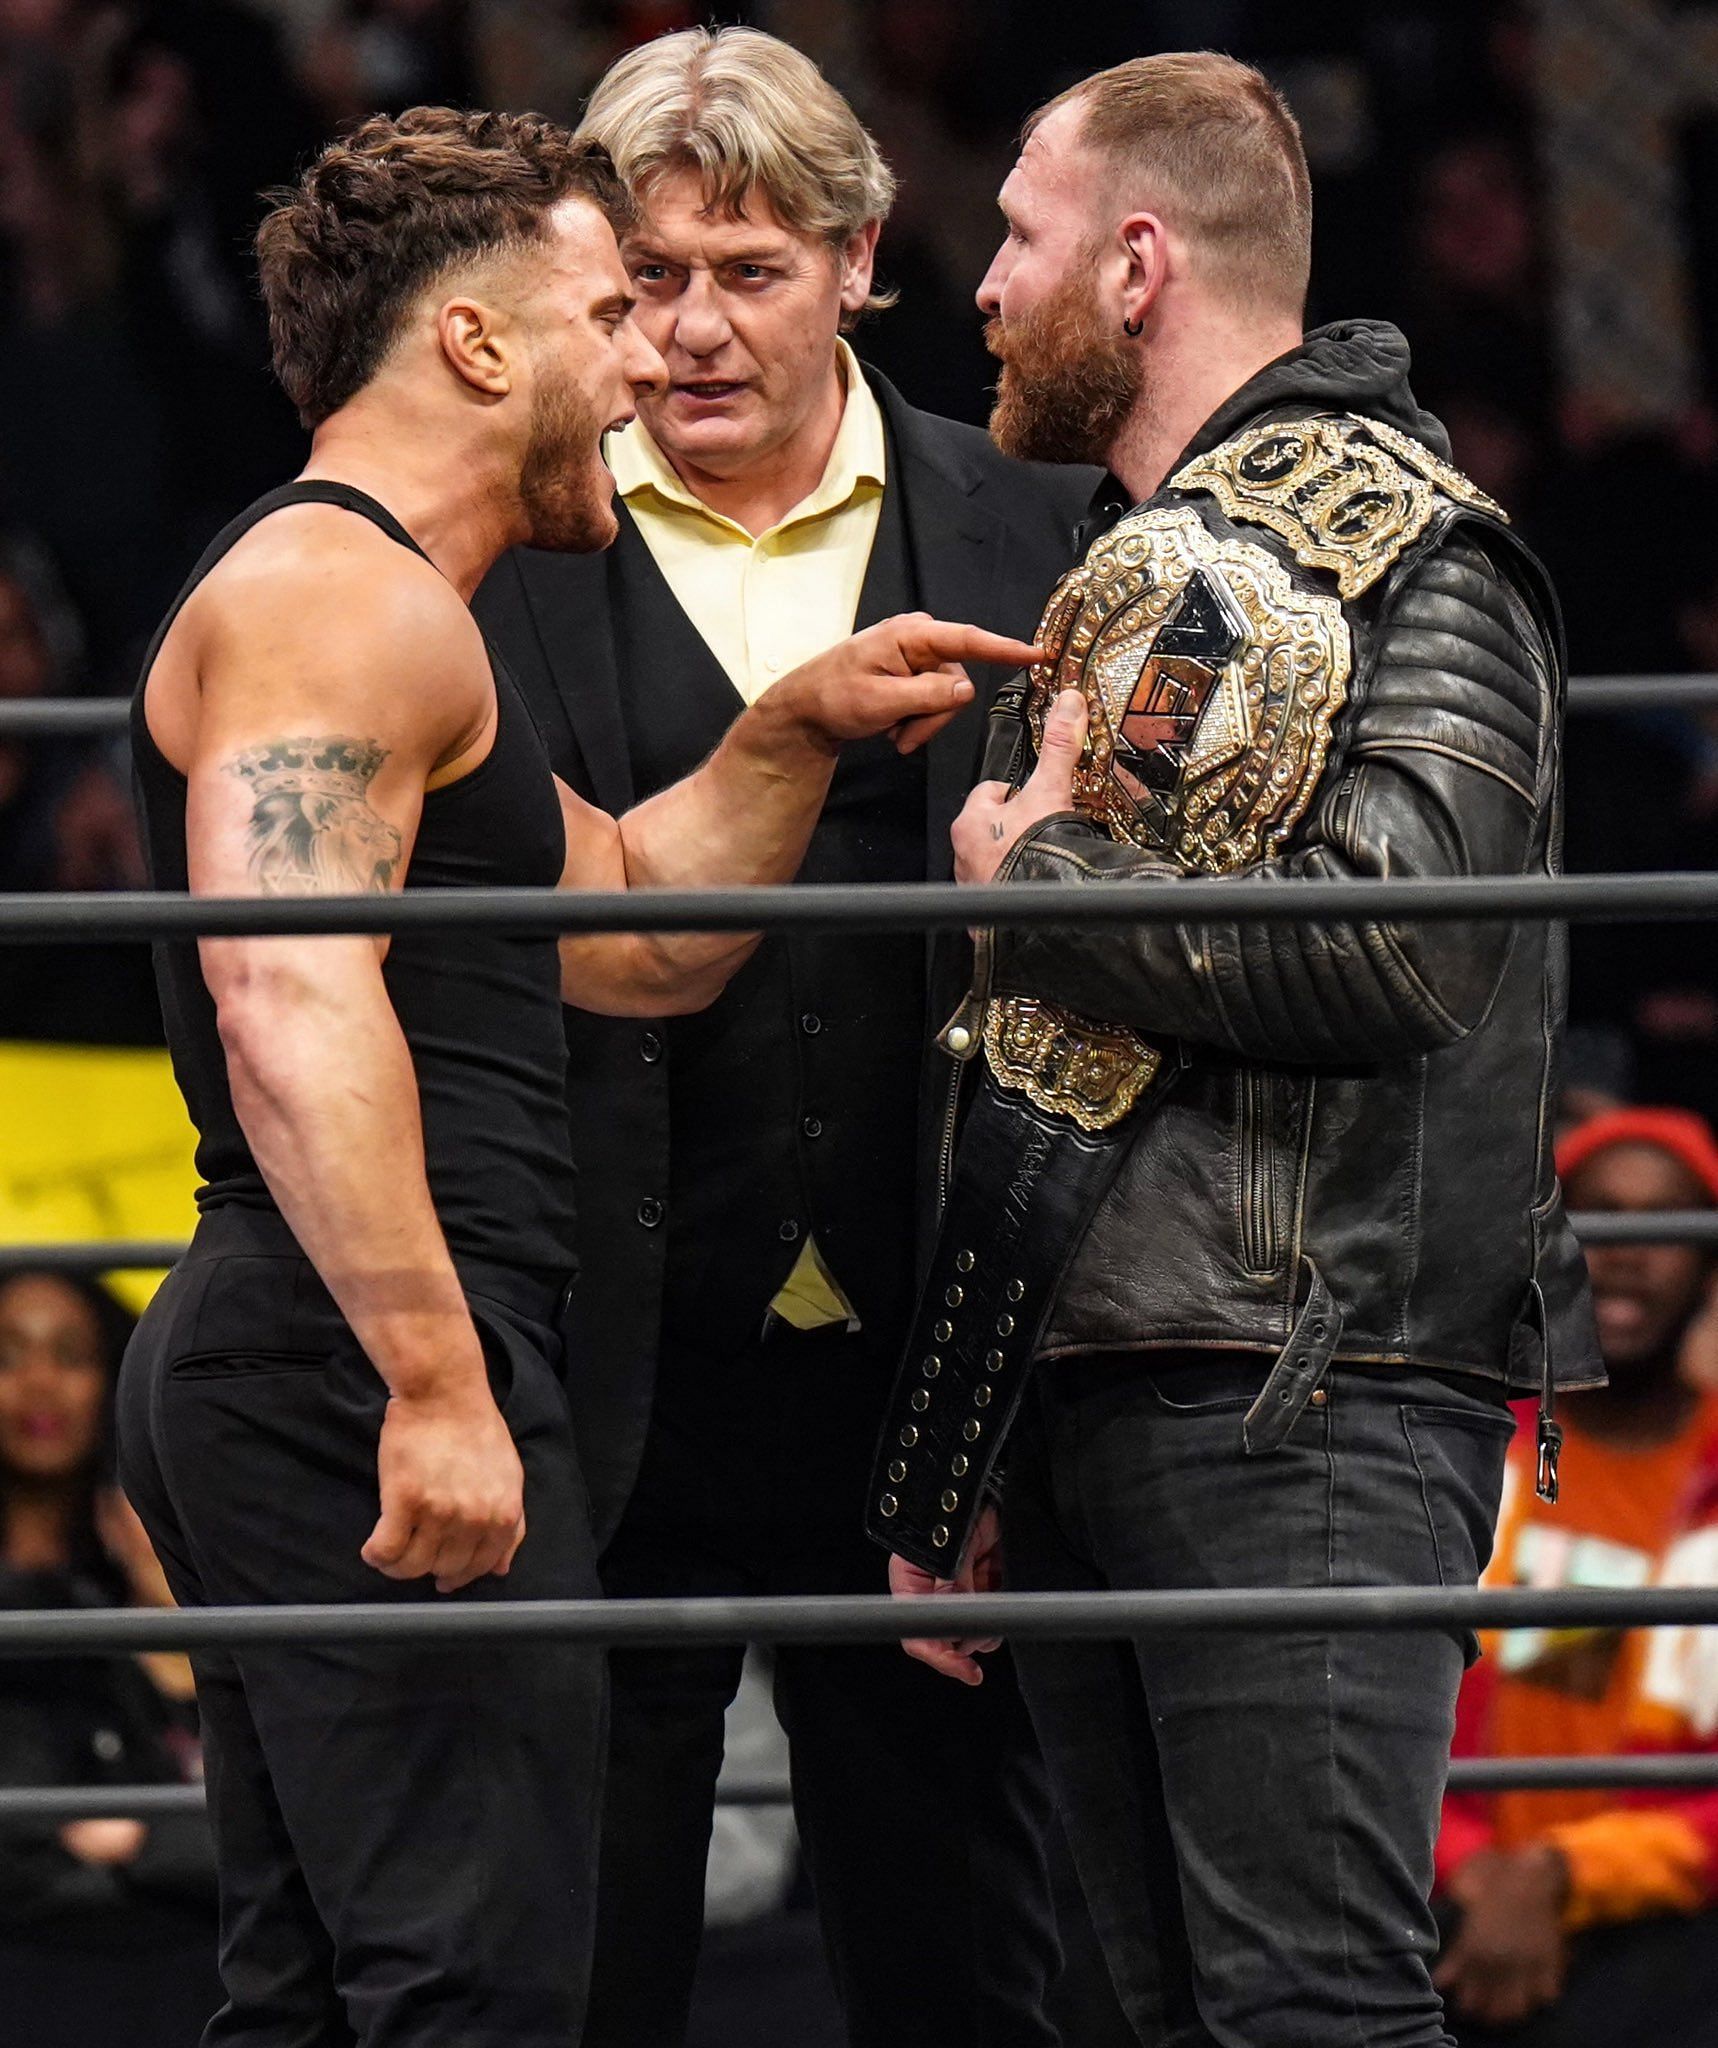 Who will stand tall at AEW Full Gear?